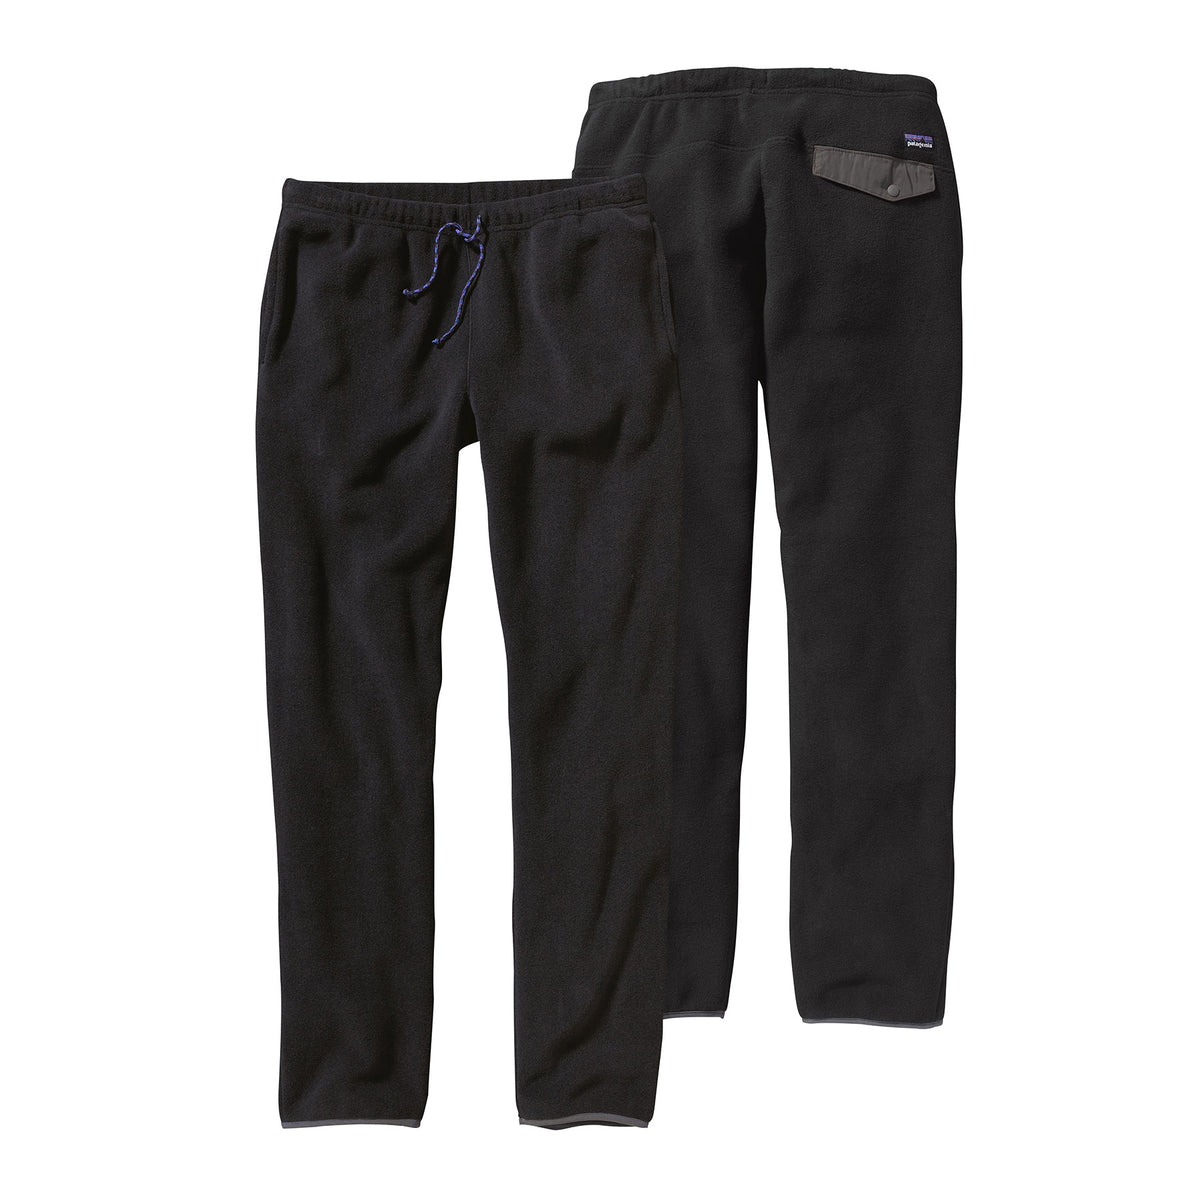 Patagonia Men's Synchilla Snap-T pants, Black with Forge grey